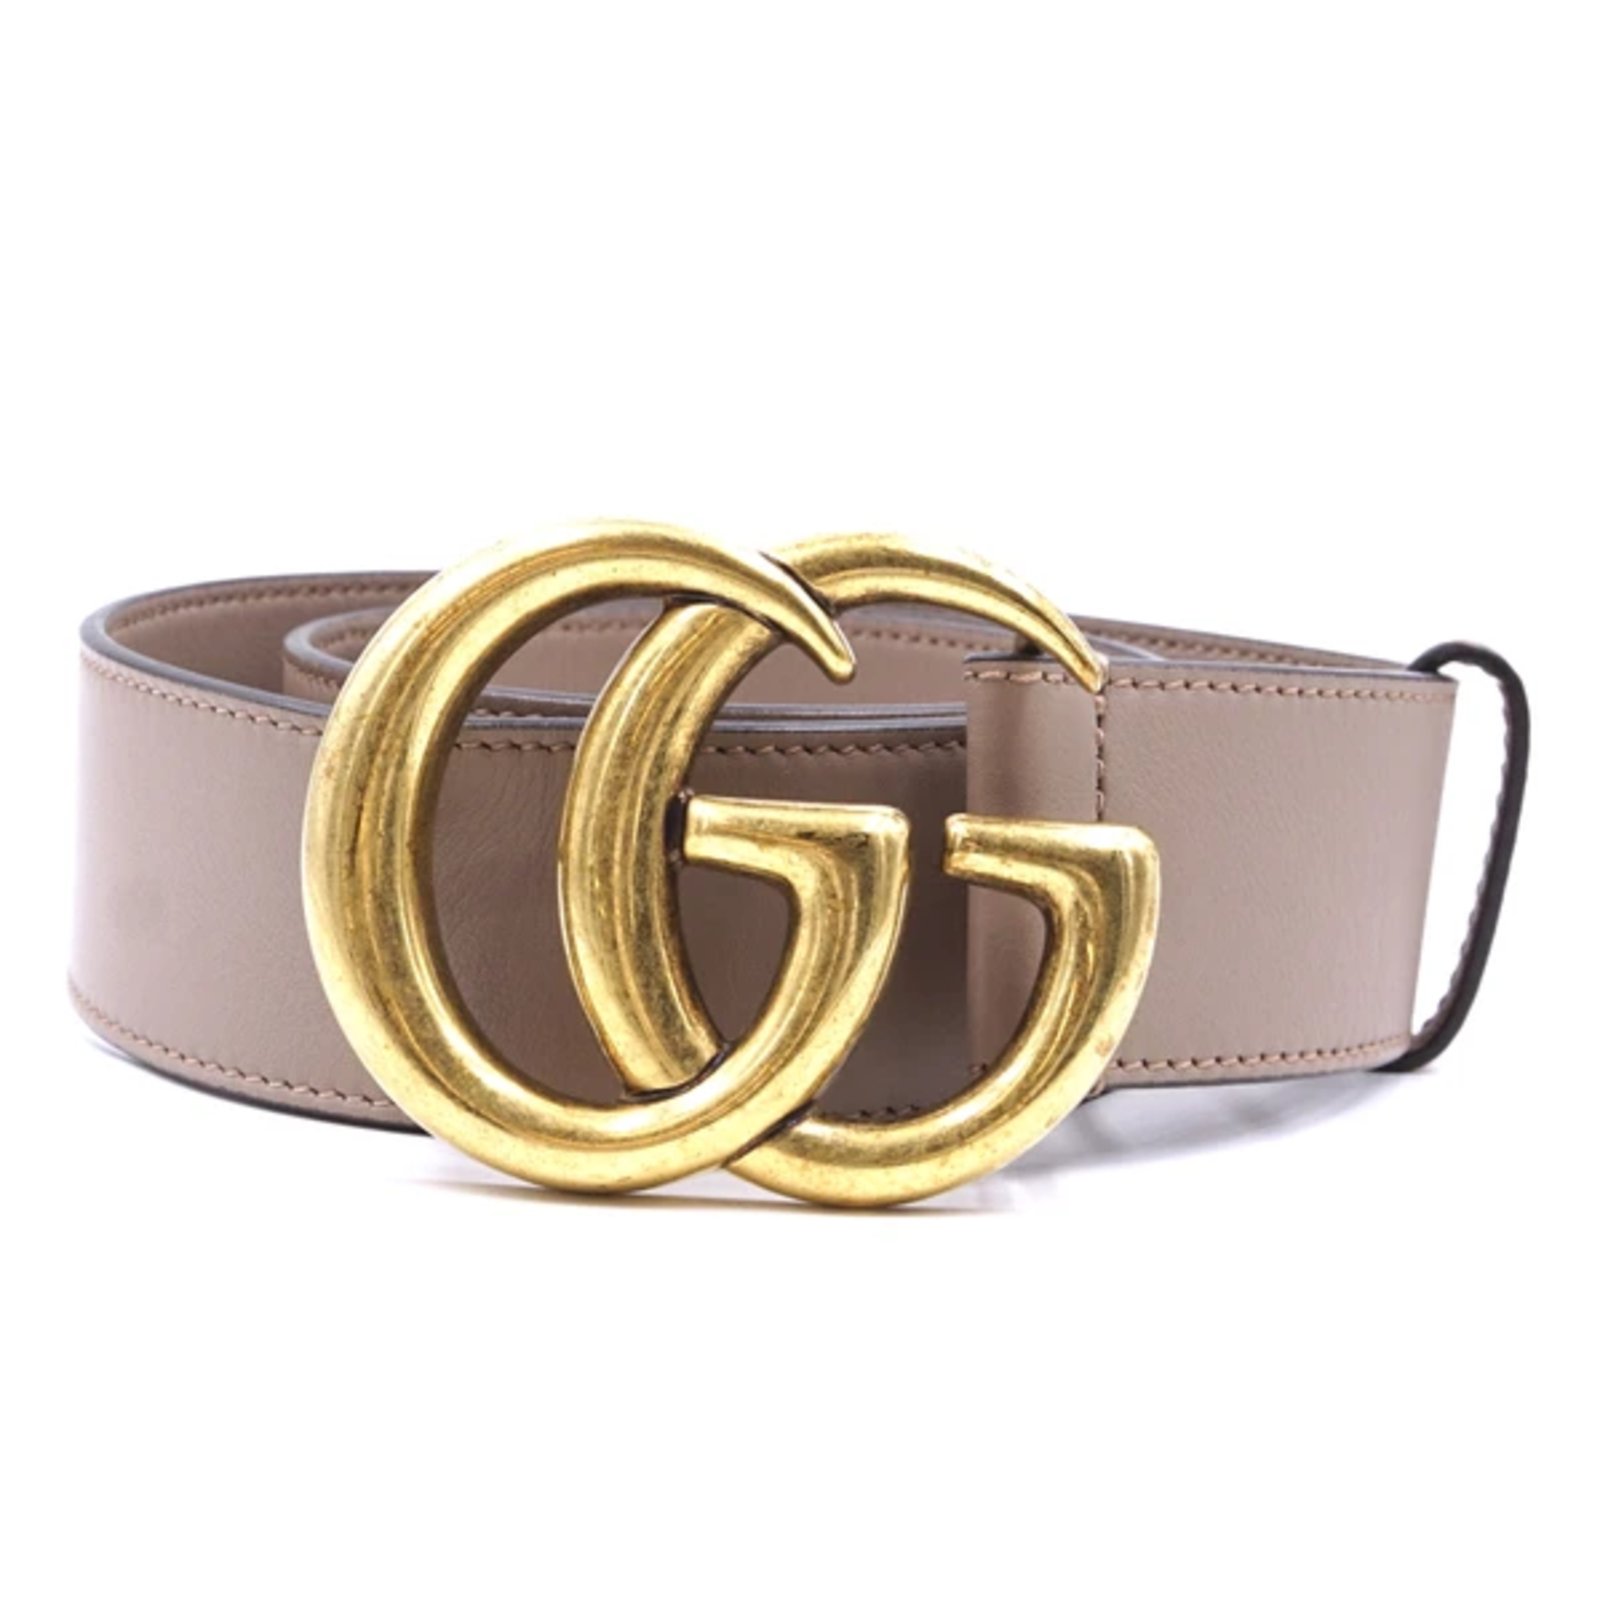 scratches on gucci belt buckle